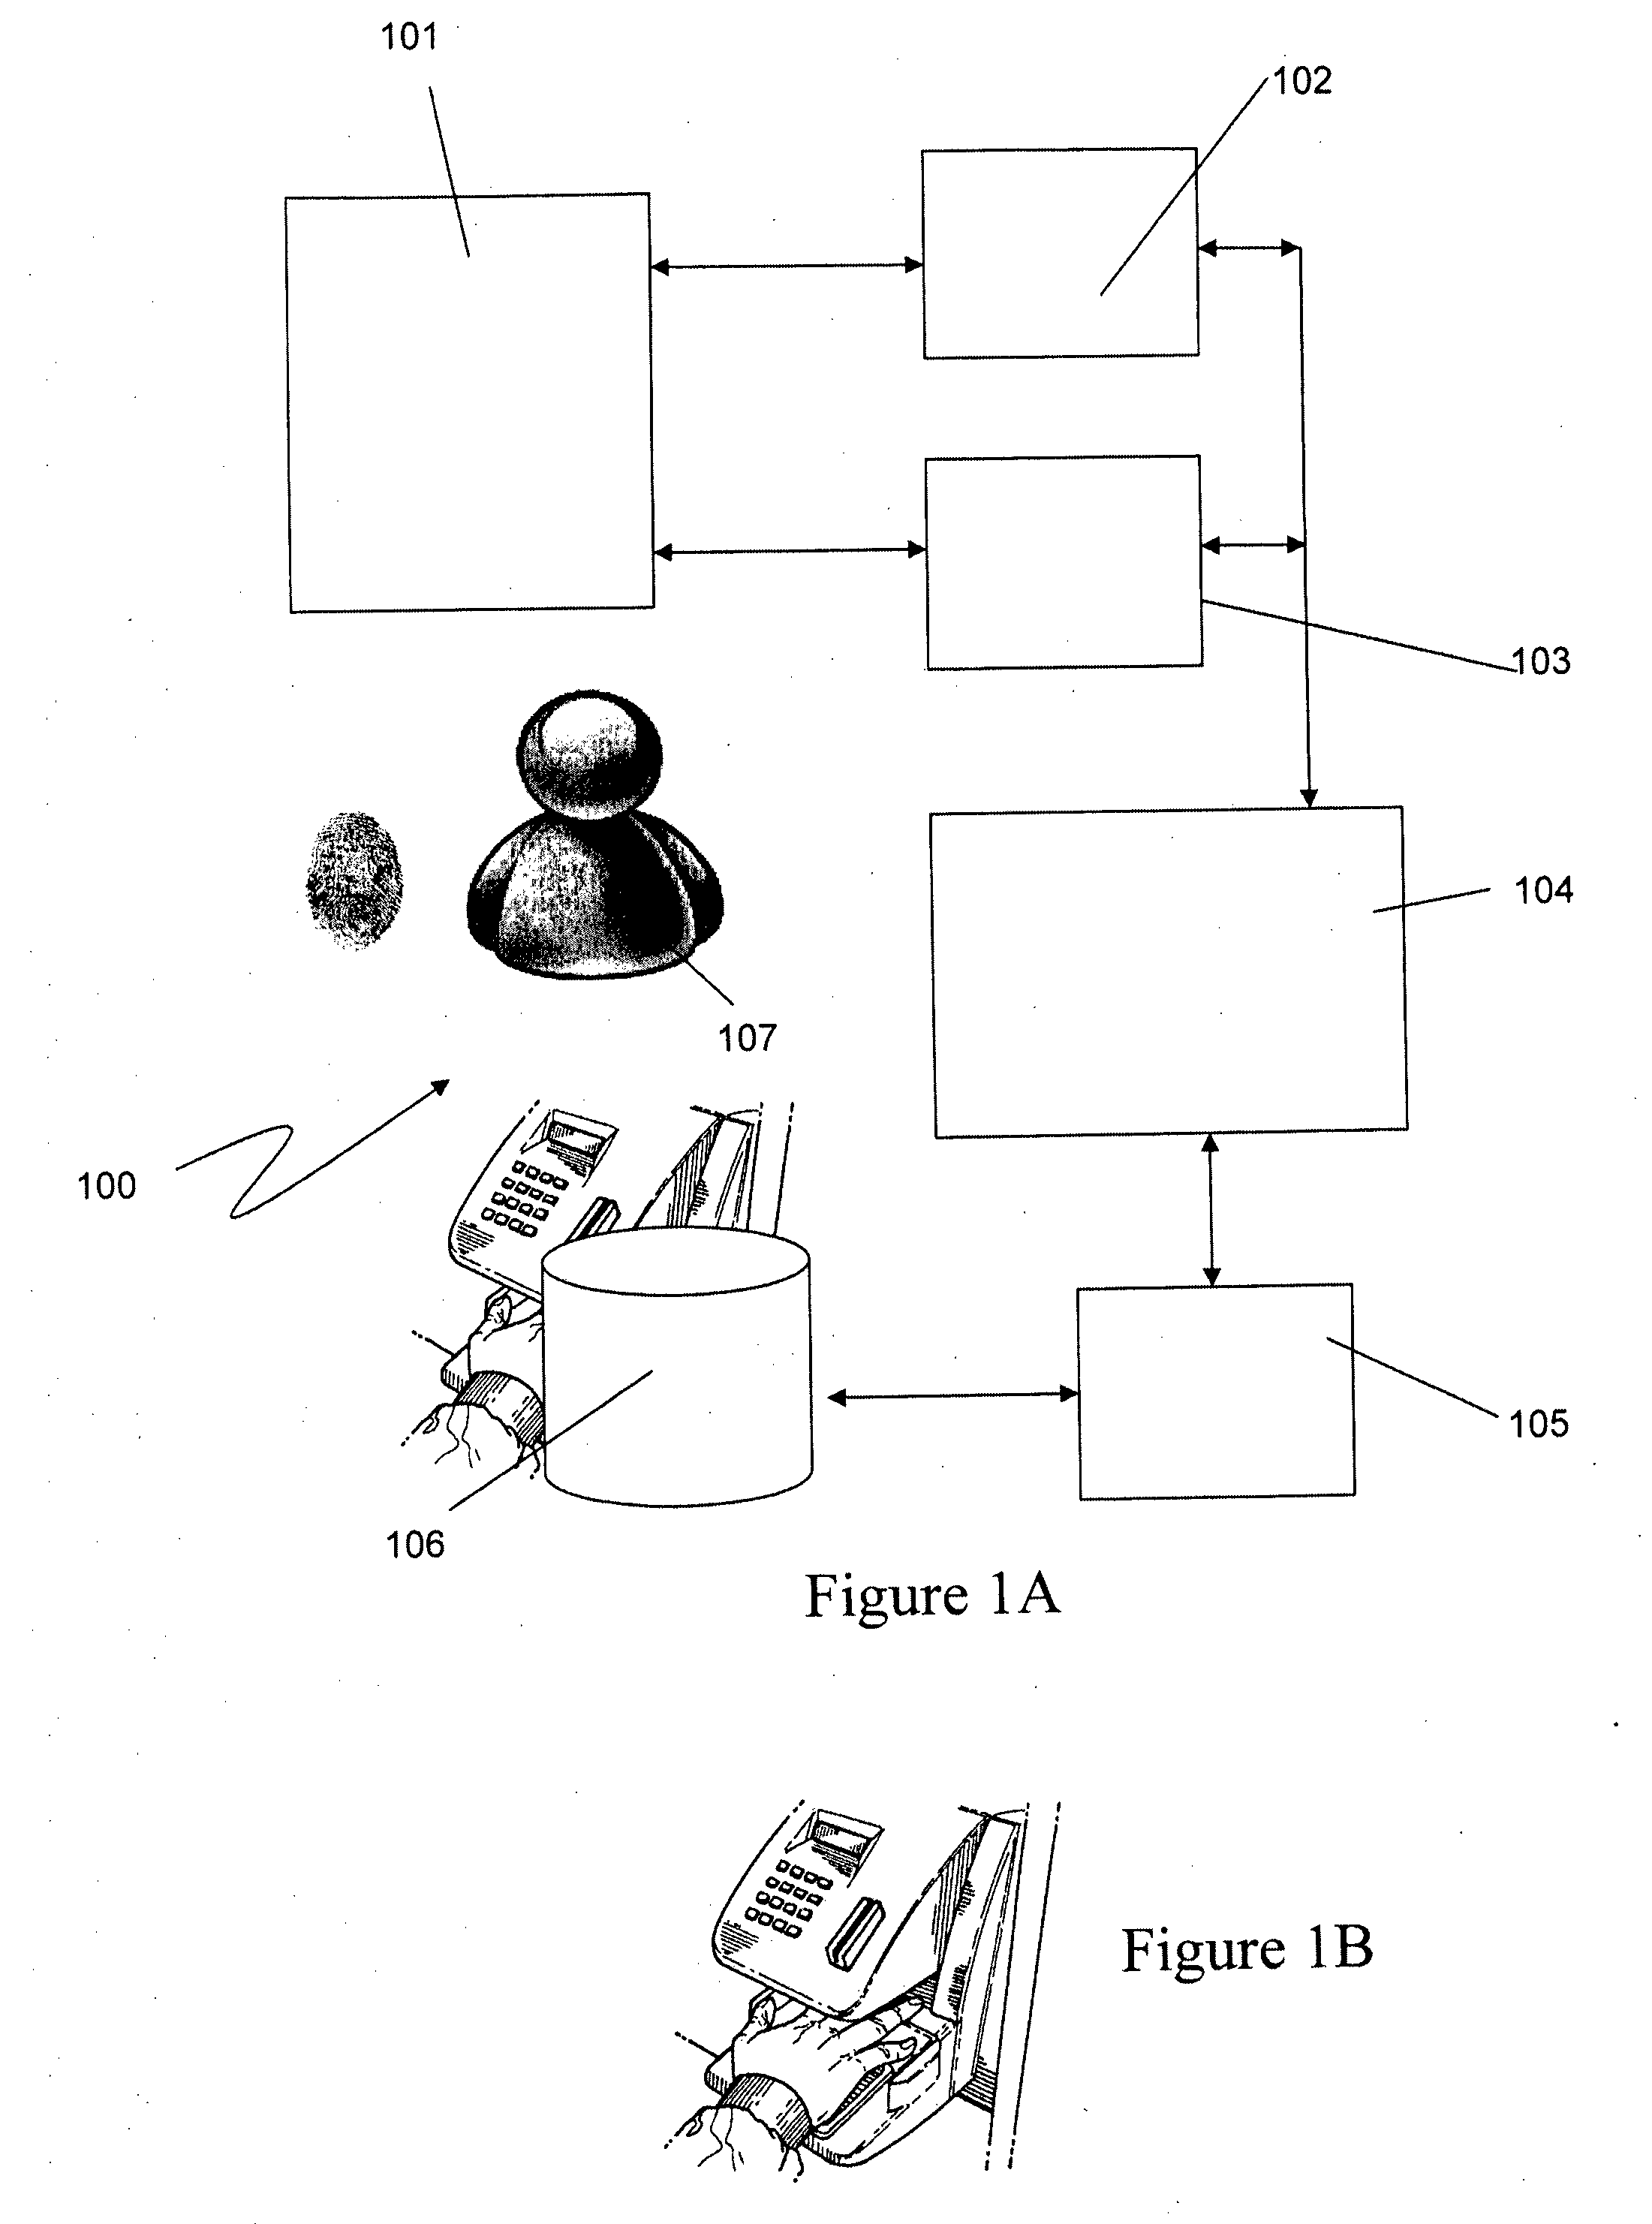 System and methods for identification and fraud prevention